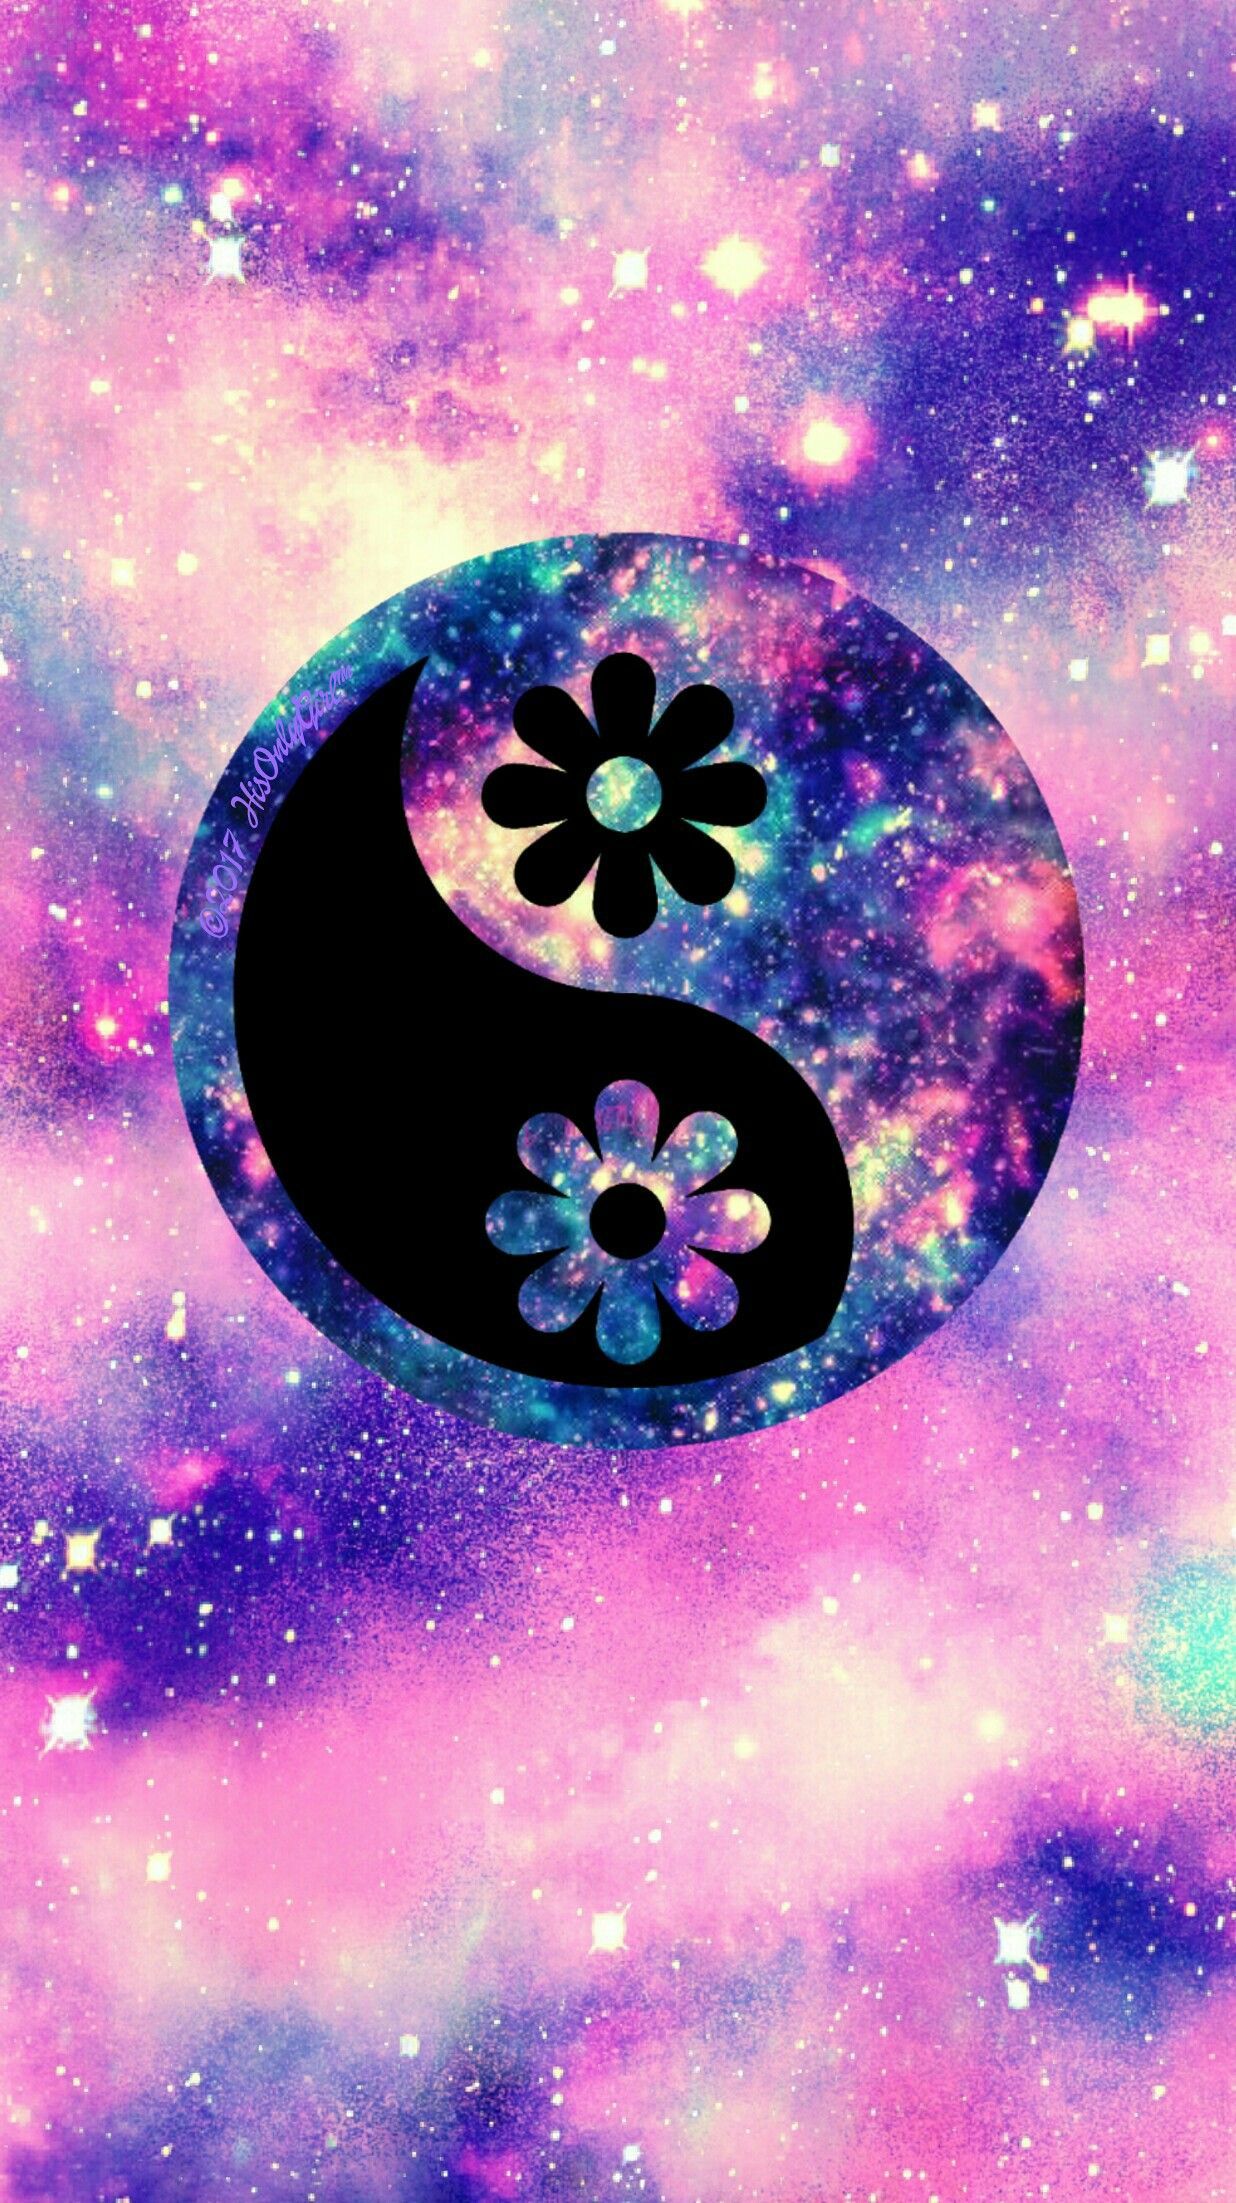 Flower yin yang galaxy wallpaper I created for the app CocoPPa. Galaxy wallpaper, Hipster phone wallpaper, iPhone wallpaper